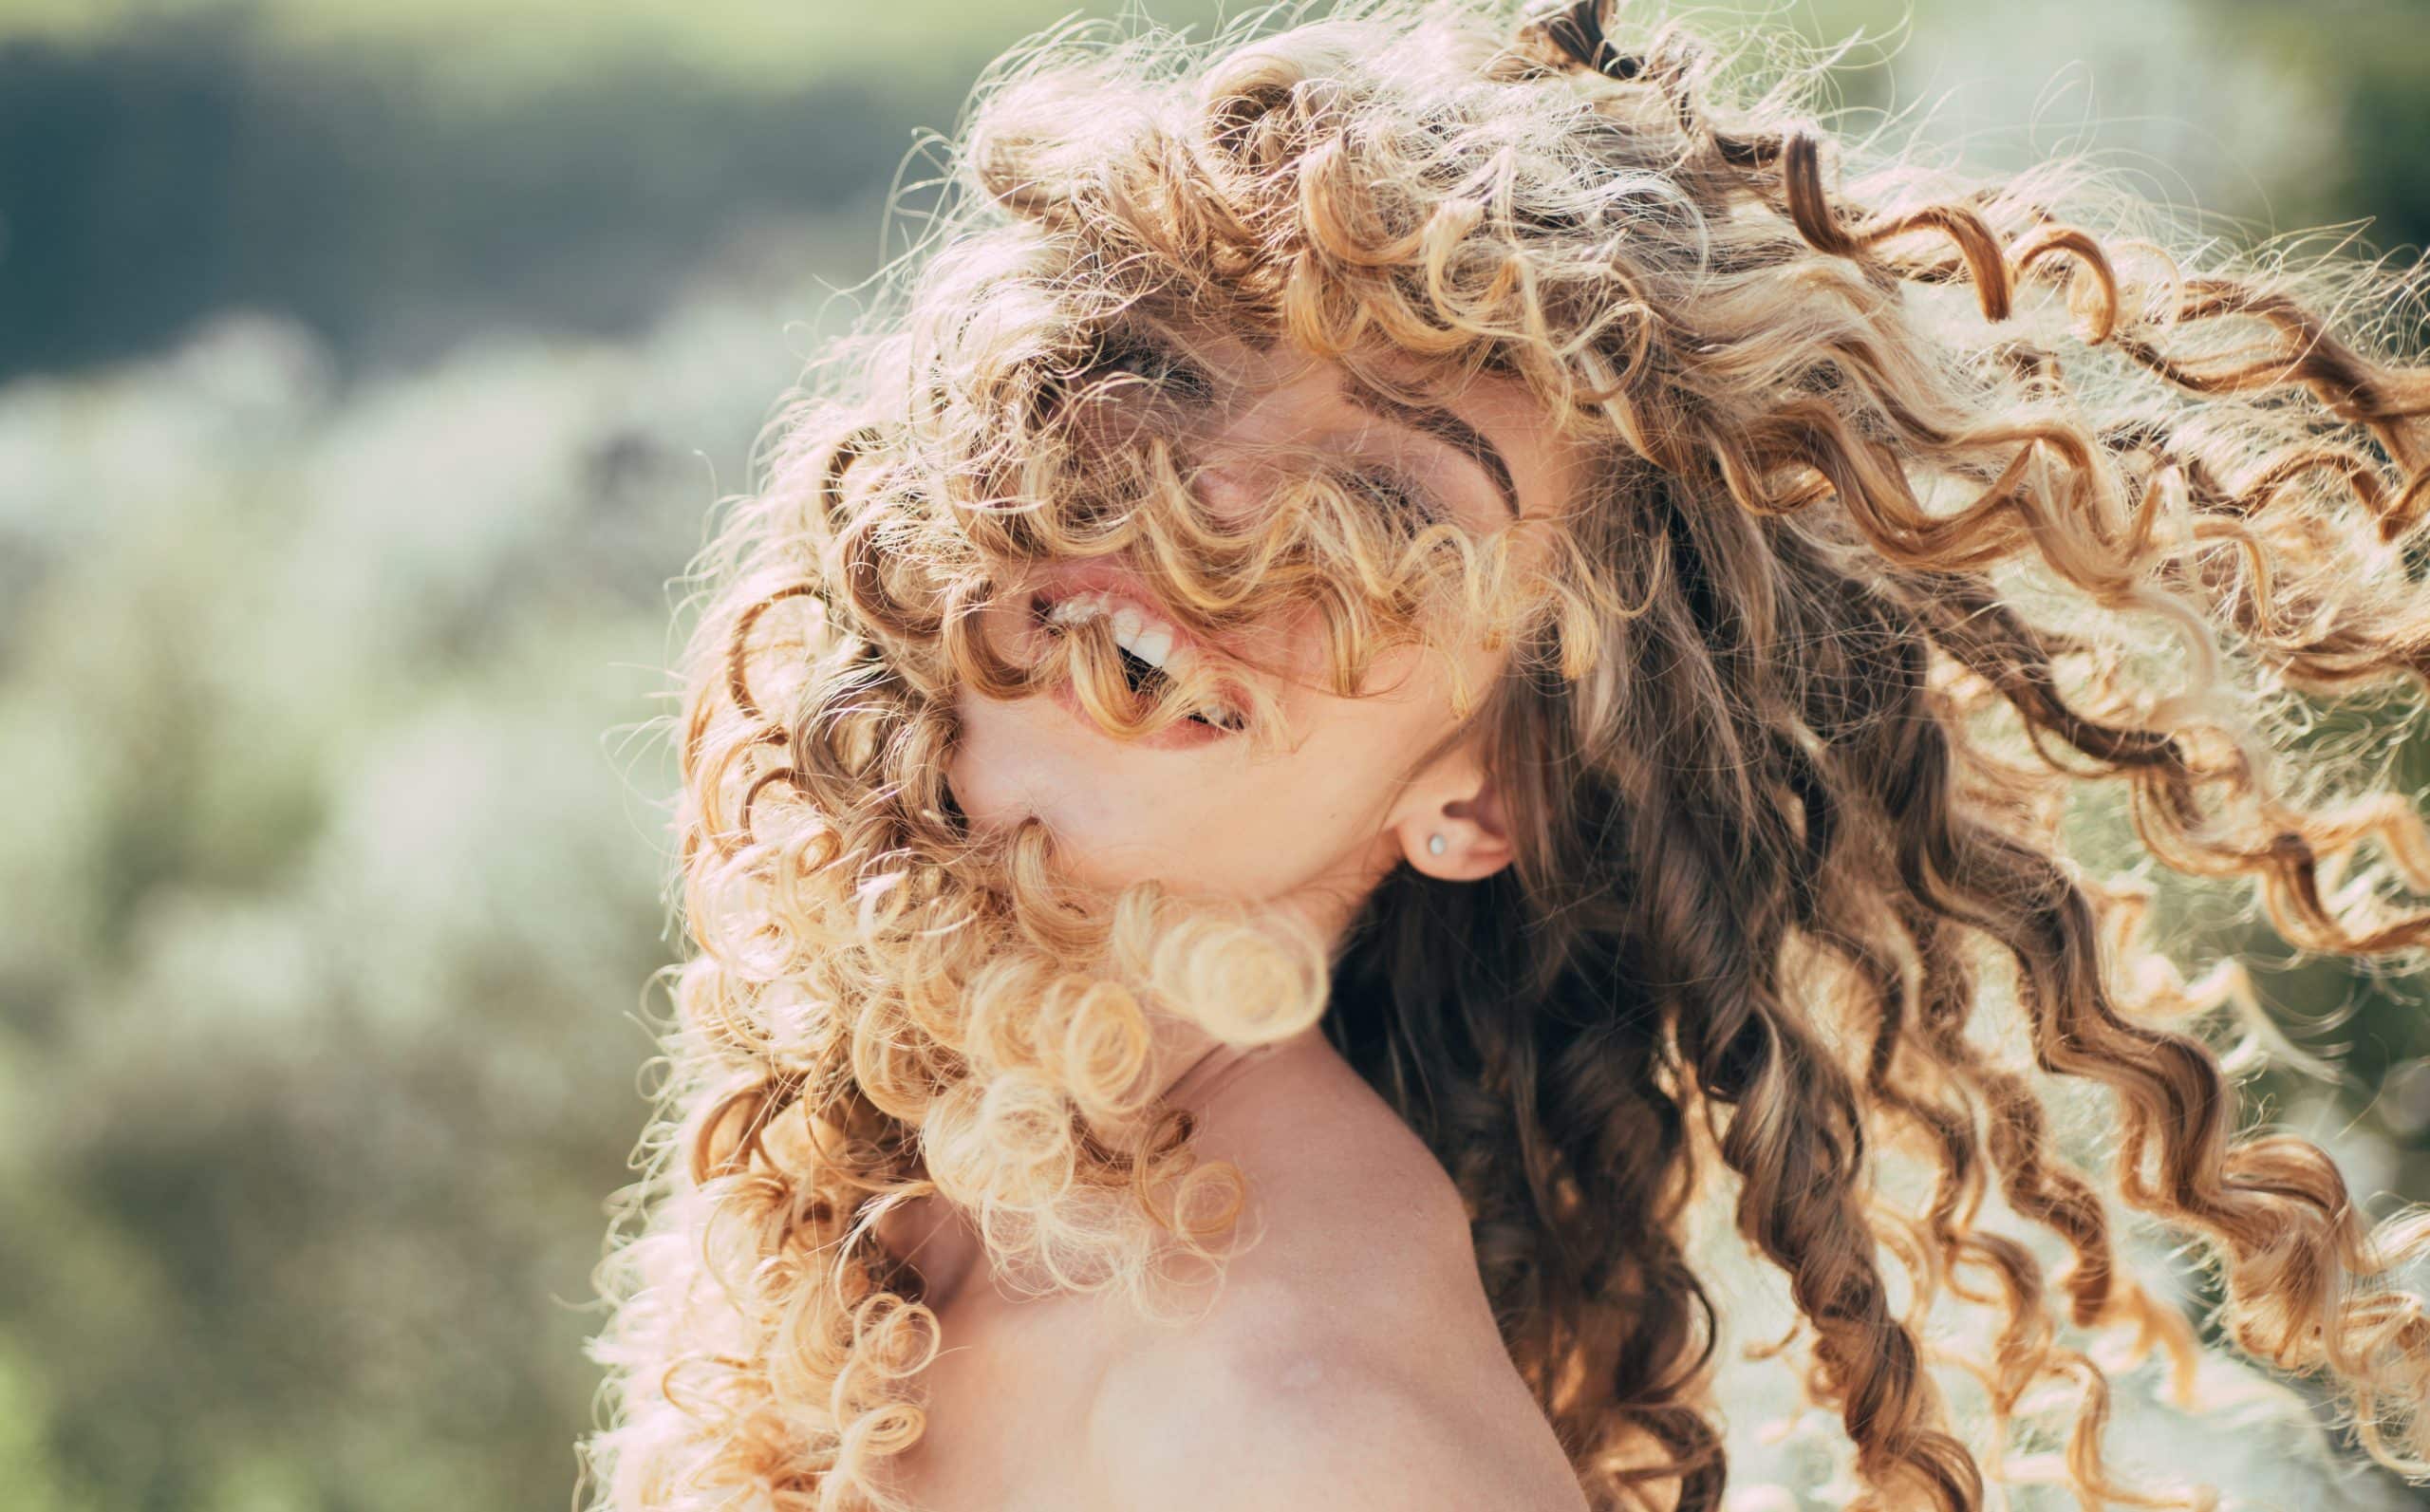 Blonde spring girl with curly beautiful hair smiling.